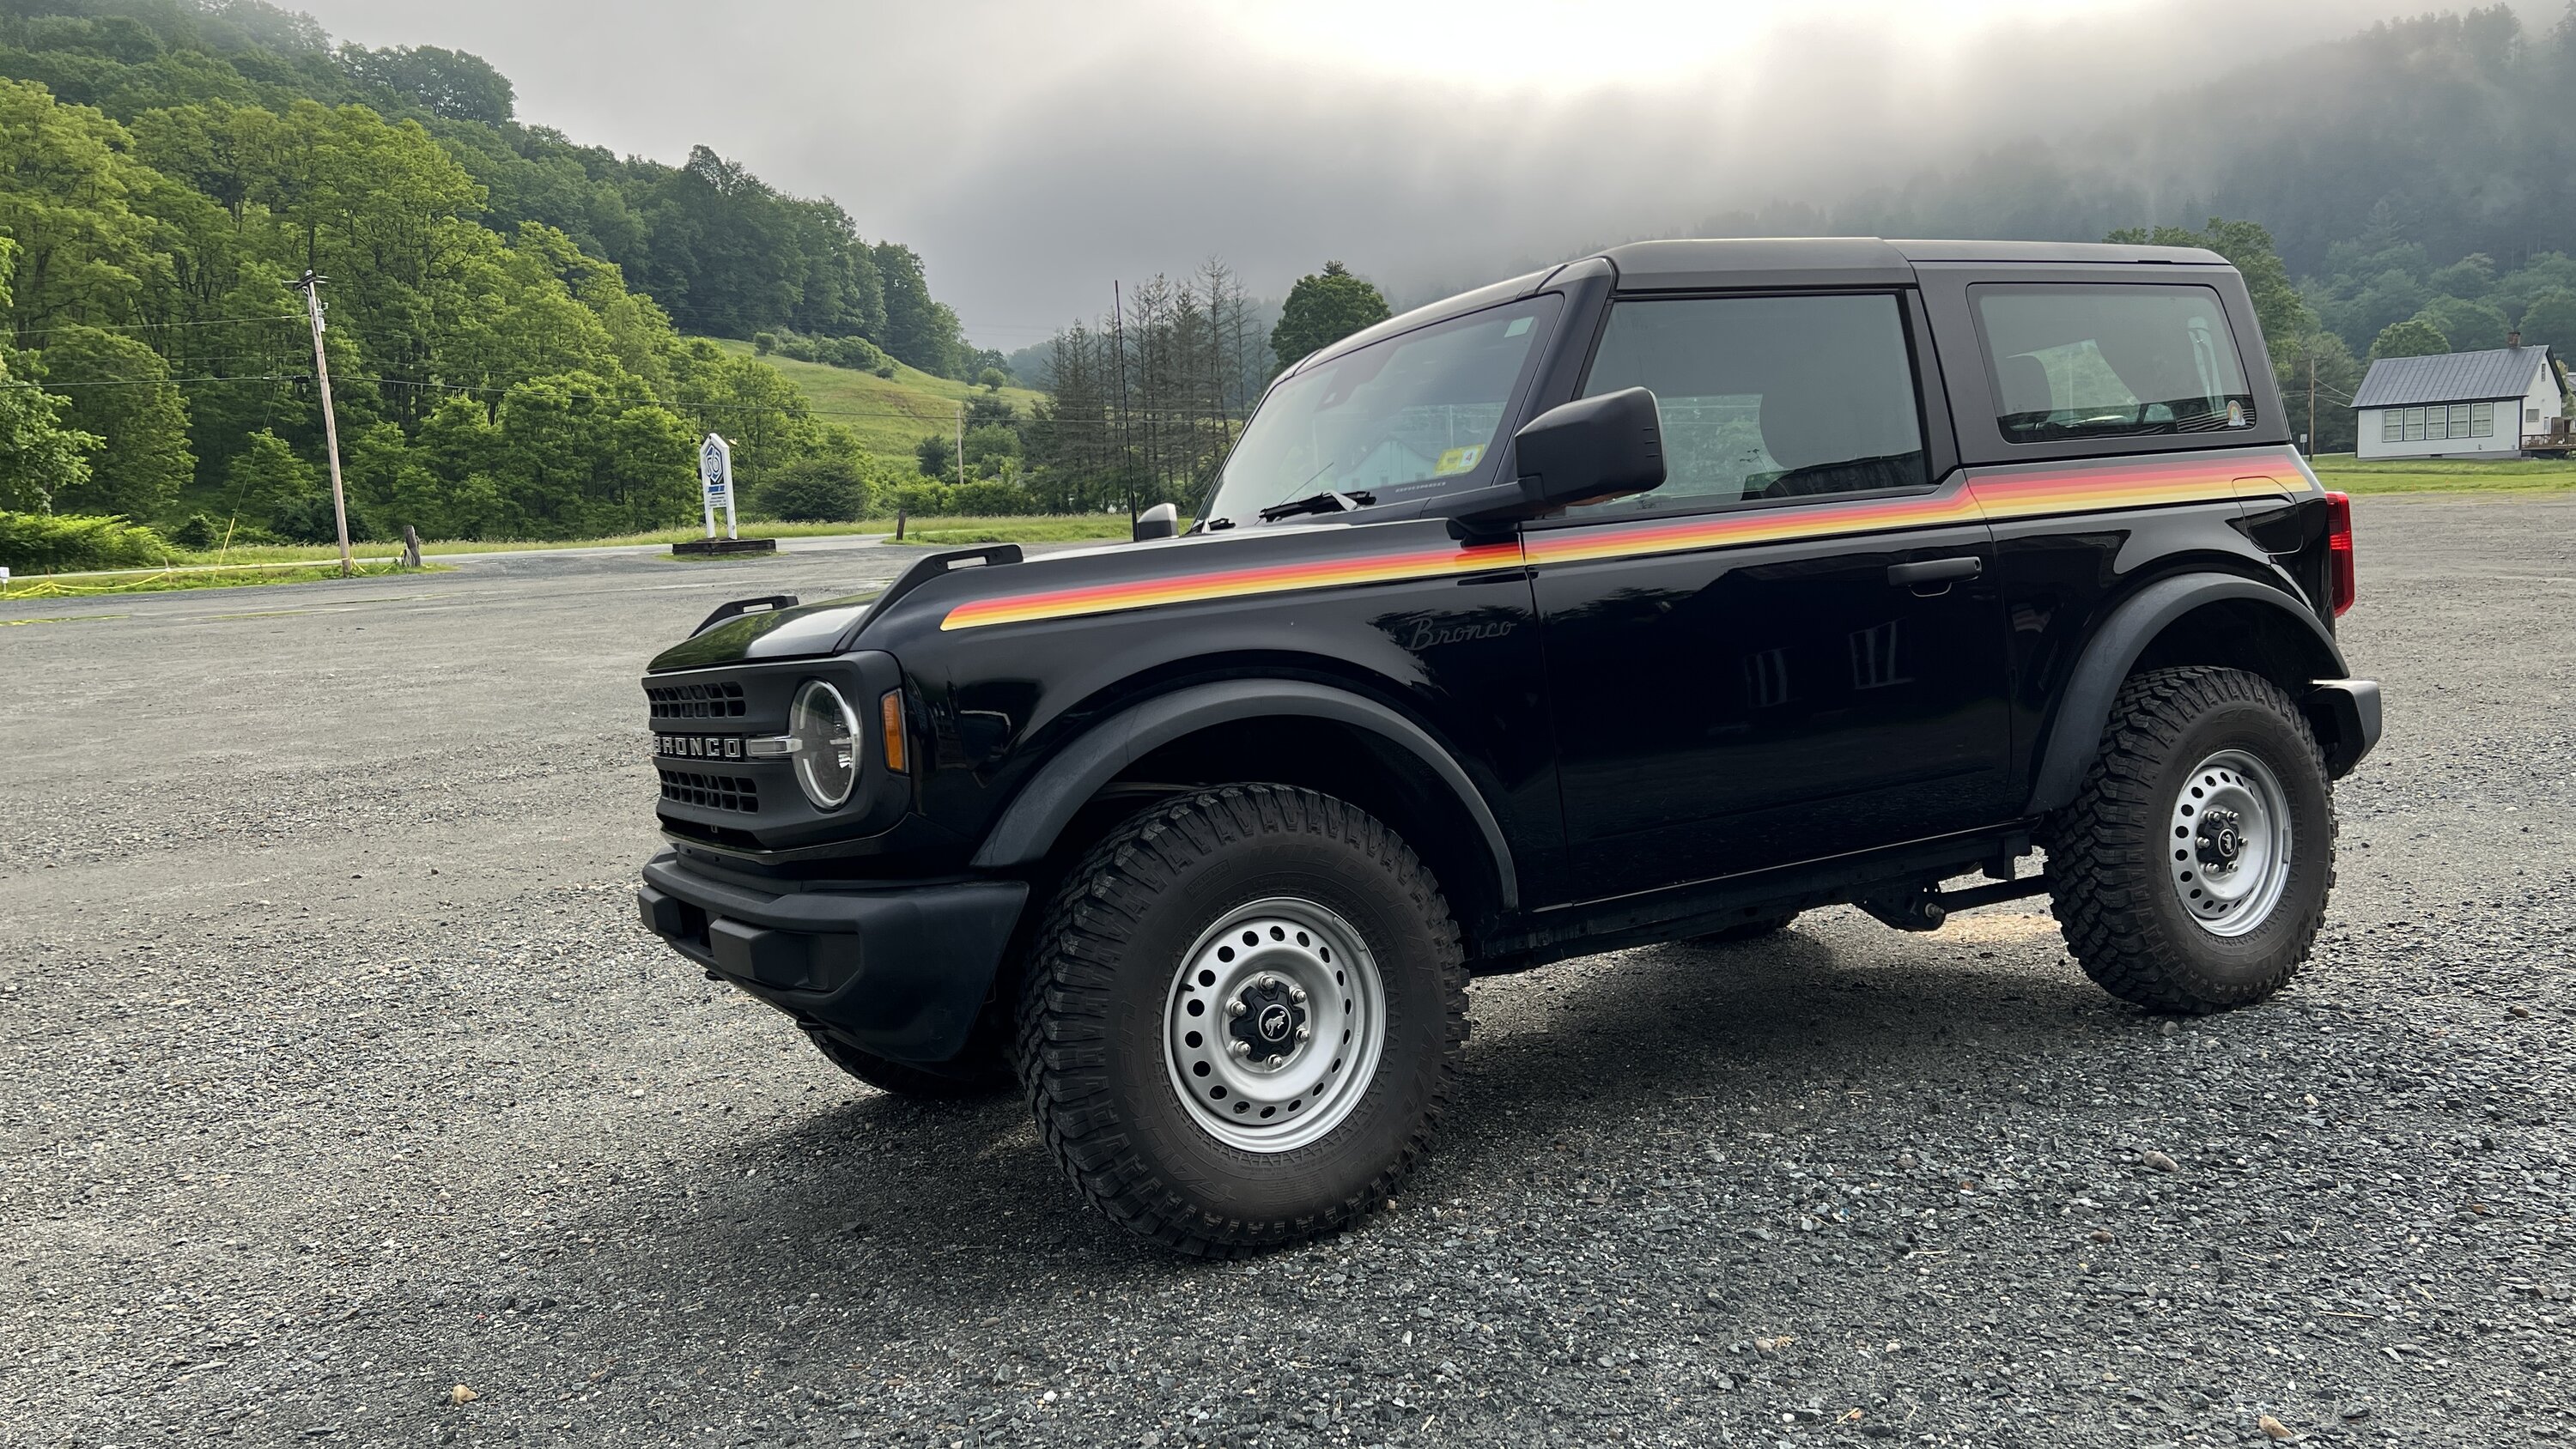 Ford Bronco Show 33's some love picture thread 772EF2AA-9B85-48F2-B073-B67BCAD667BC